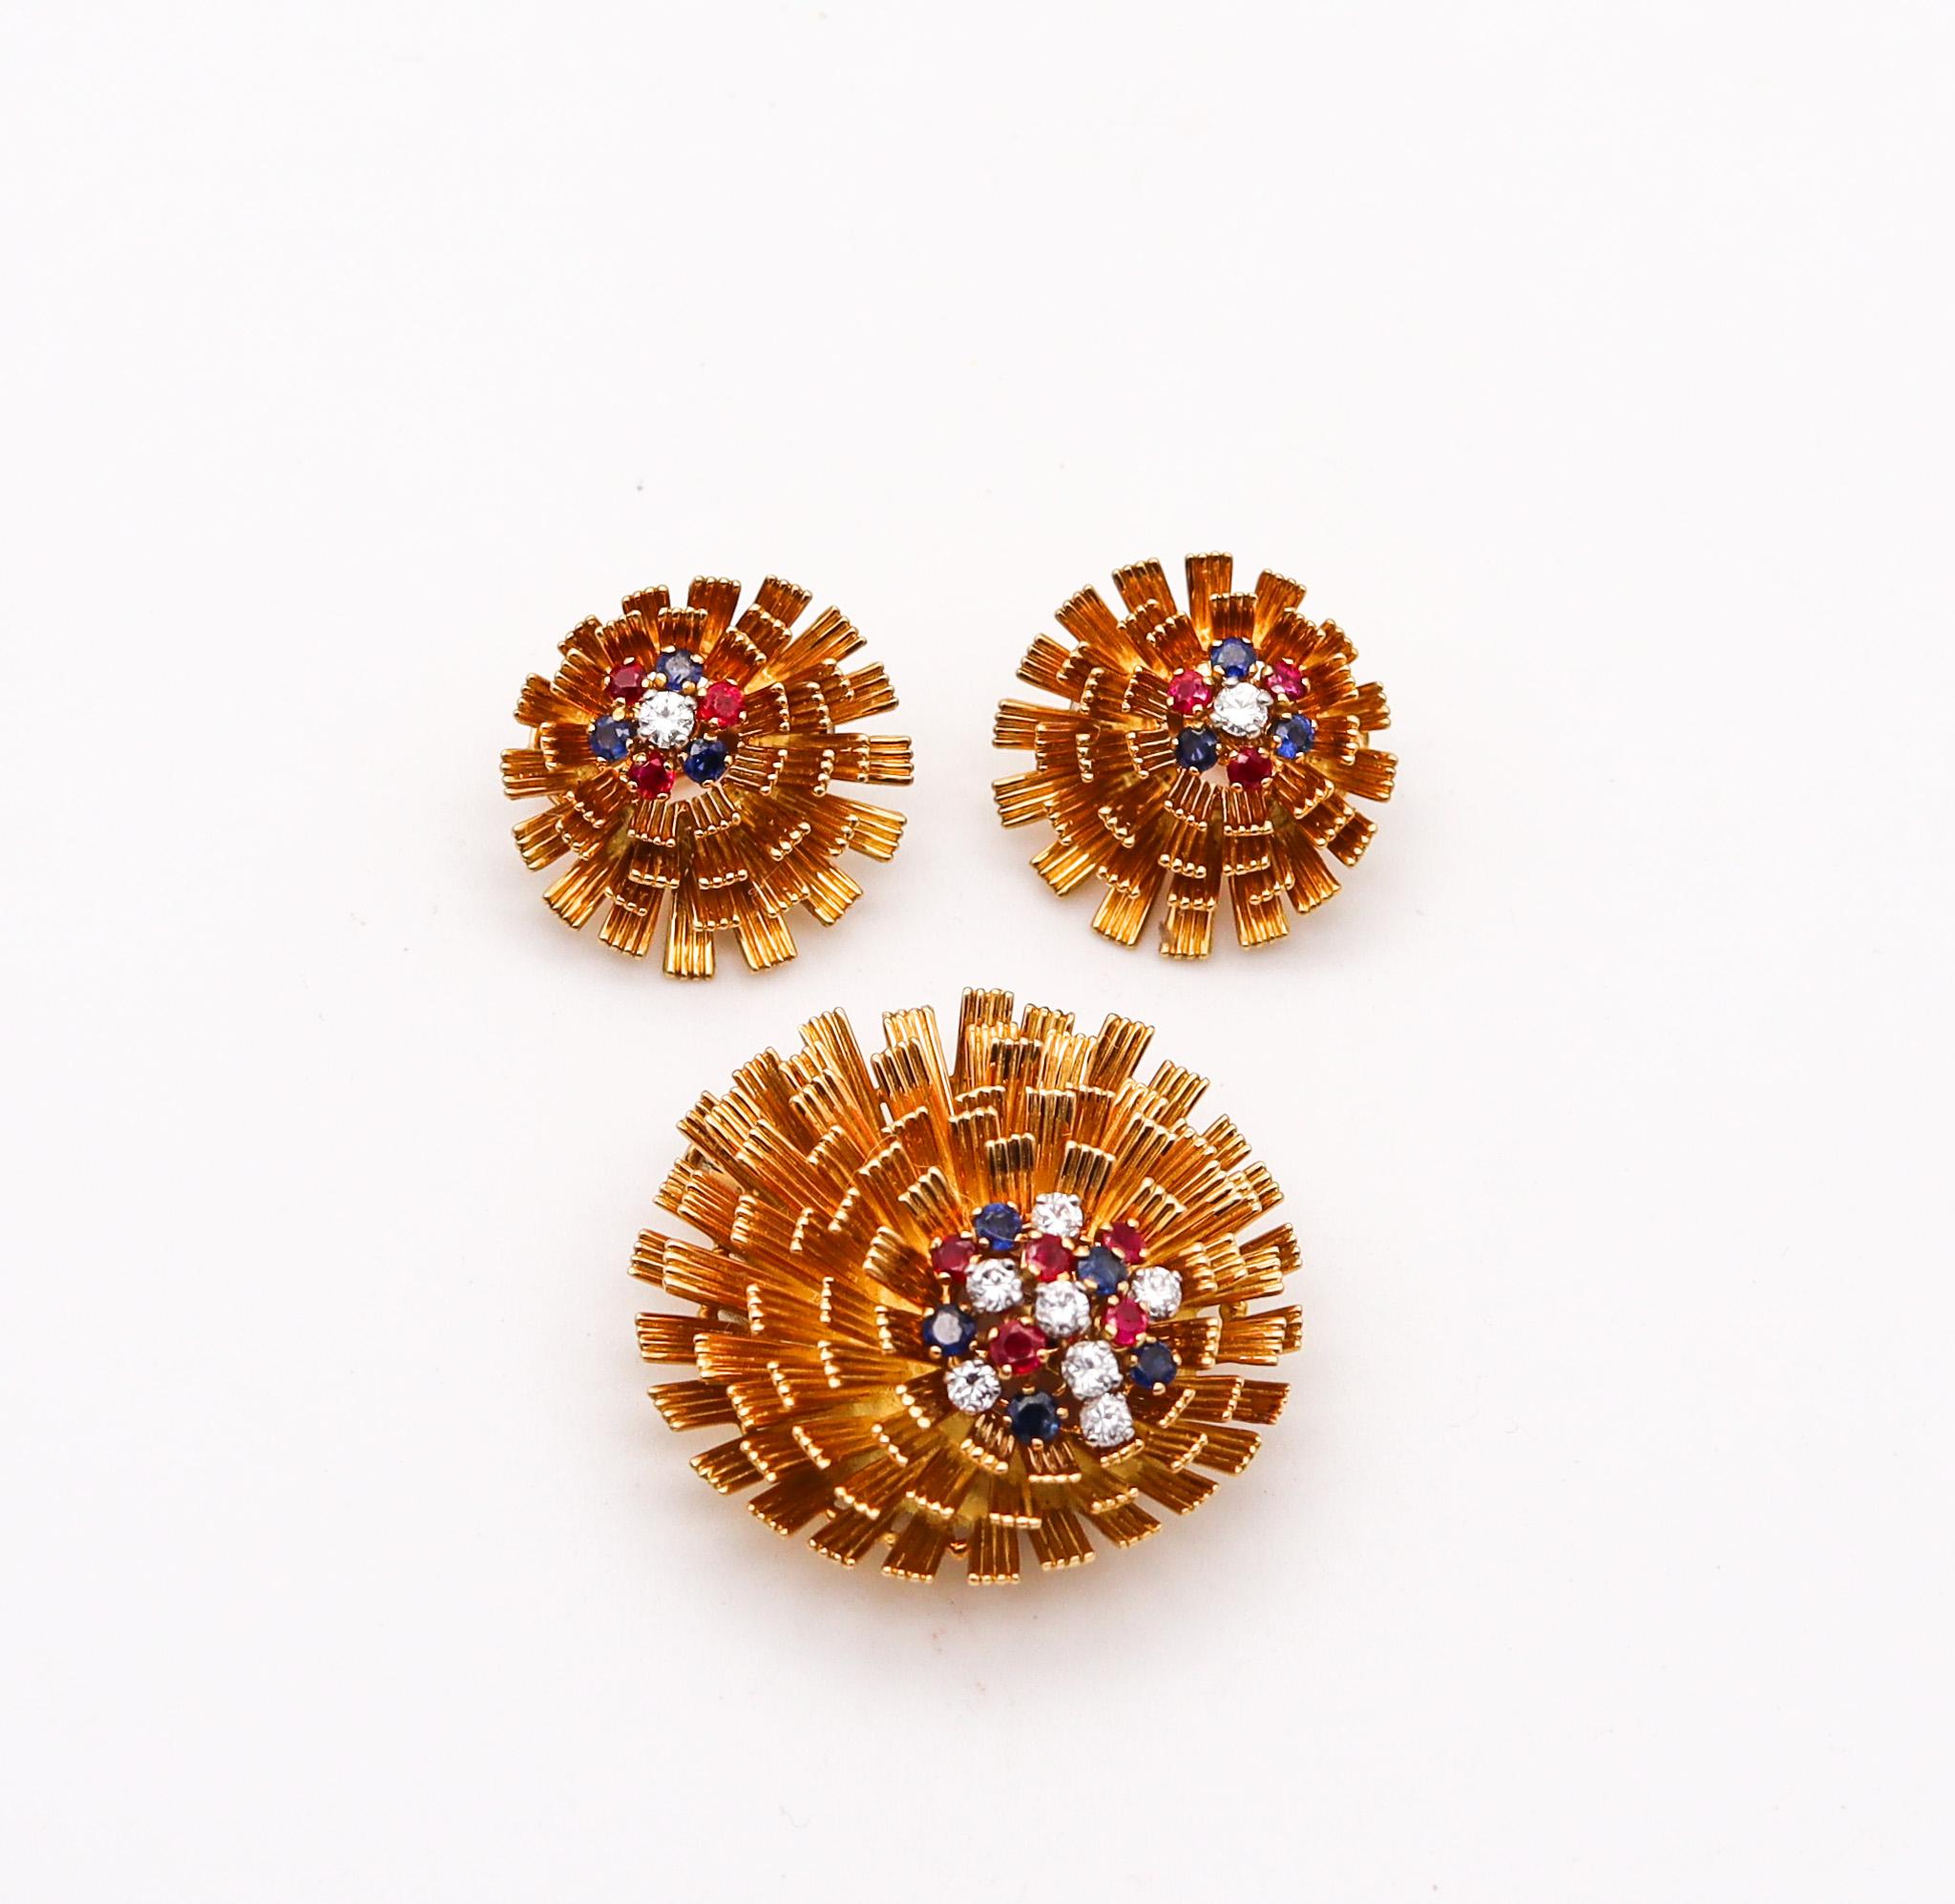 Earrings and brooch suite made in France.

Amazing retro modernist parure suite, created in Paris France during the mid century period, back in the 1960. Carefully assembled by multiples parts crafted in solid yellow gold of 18 karats with textured